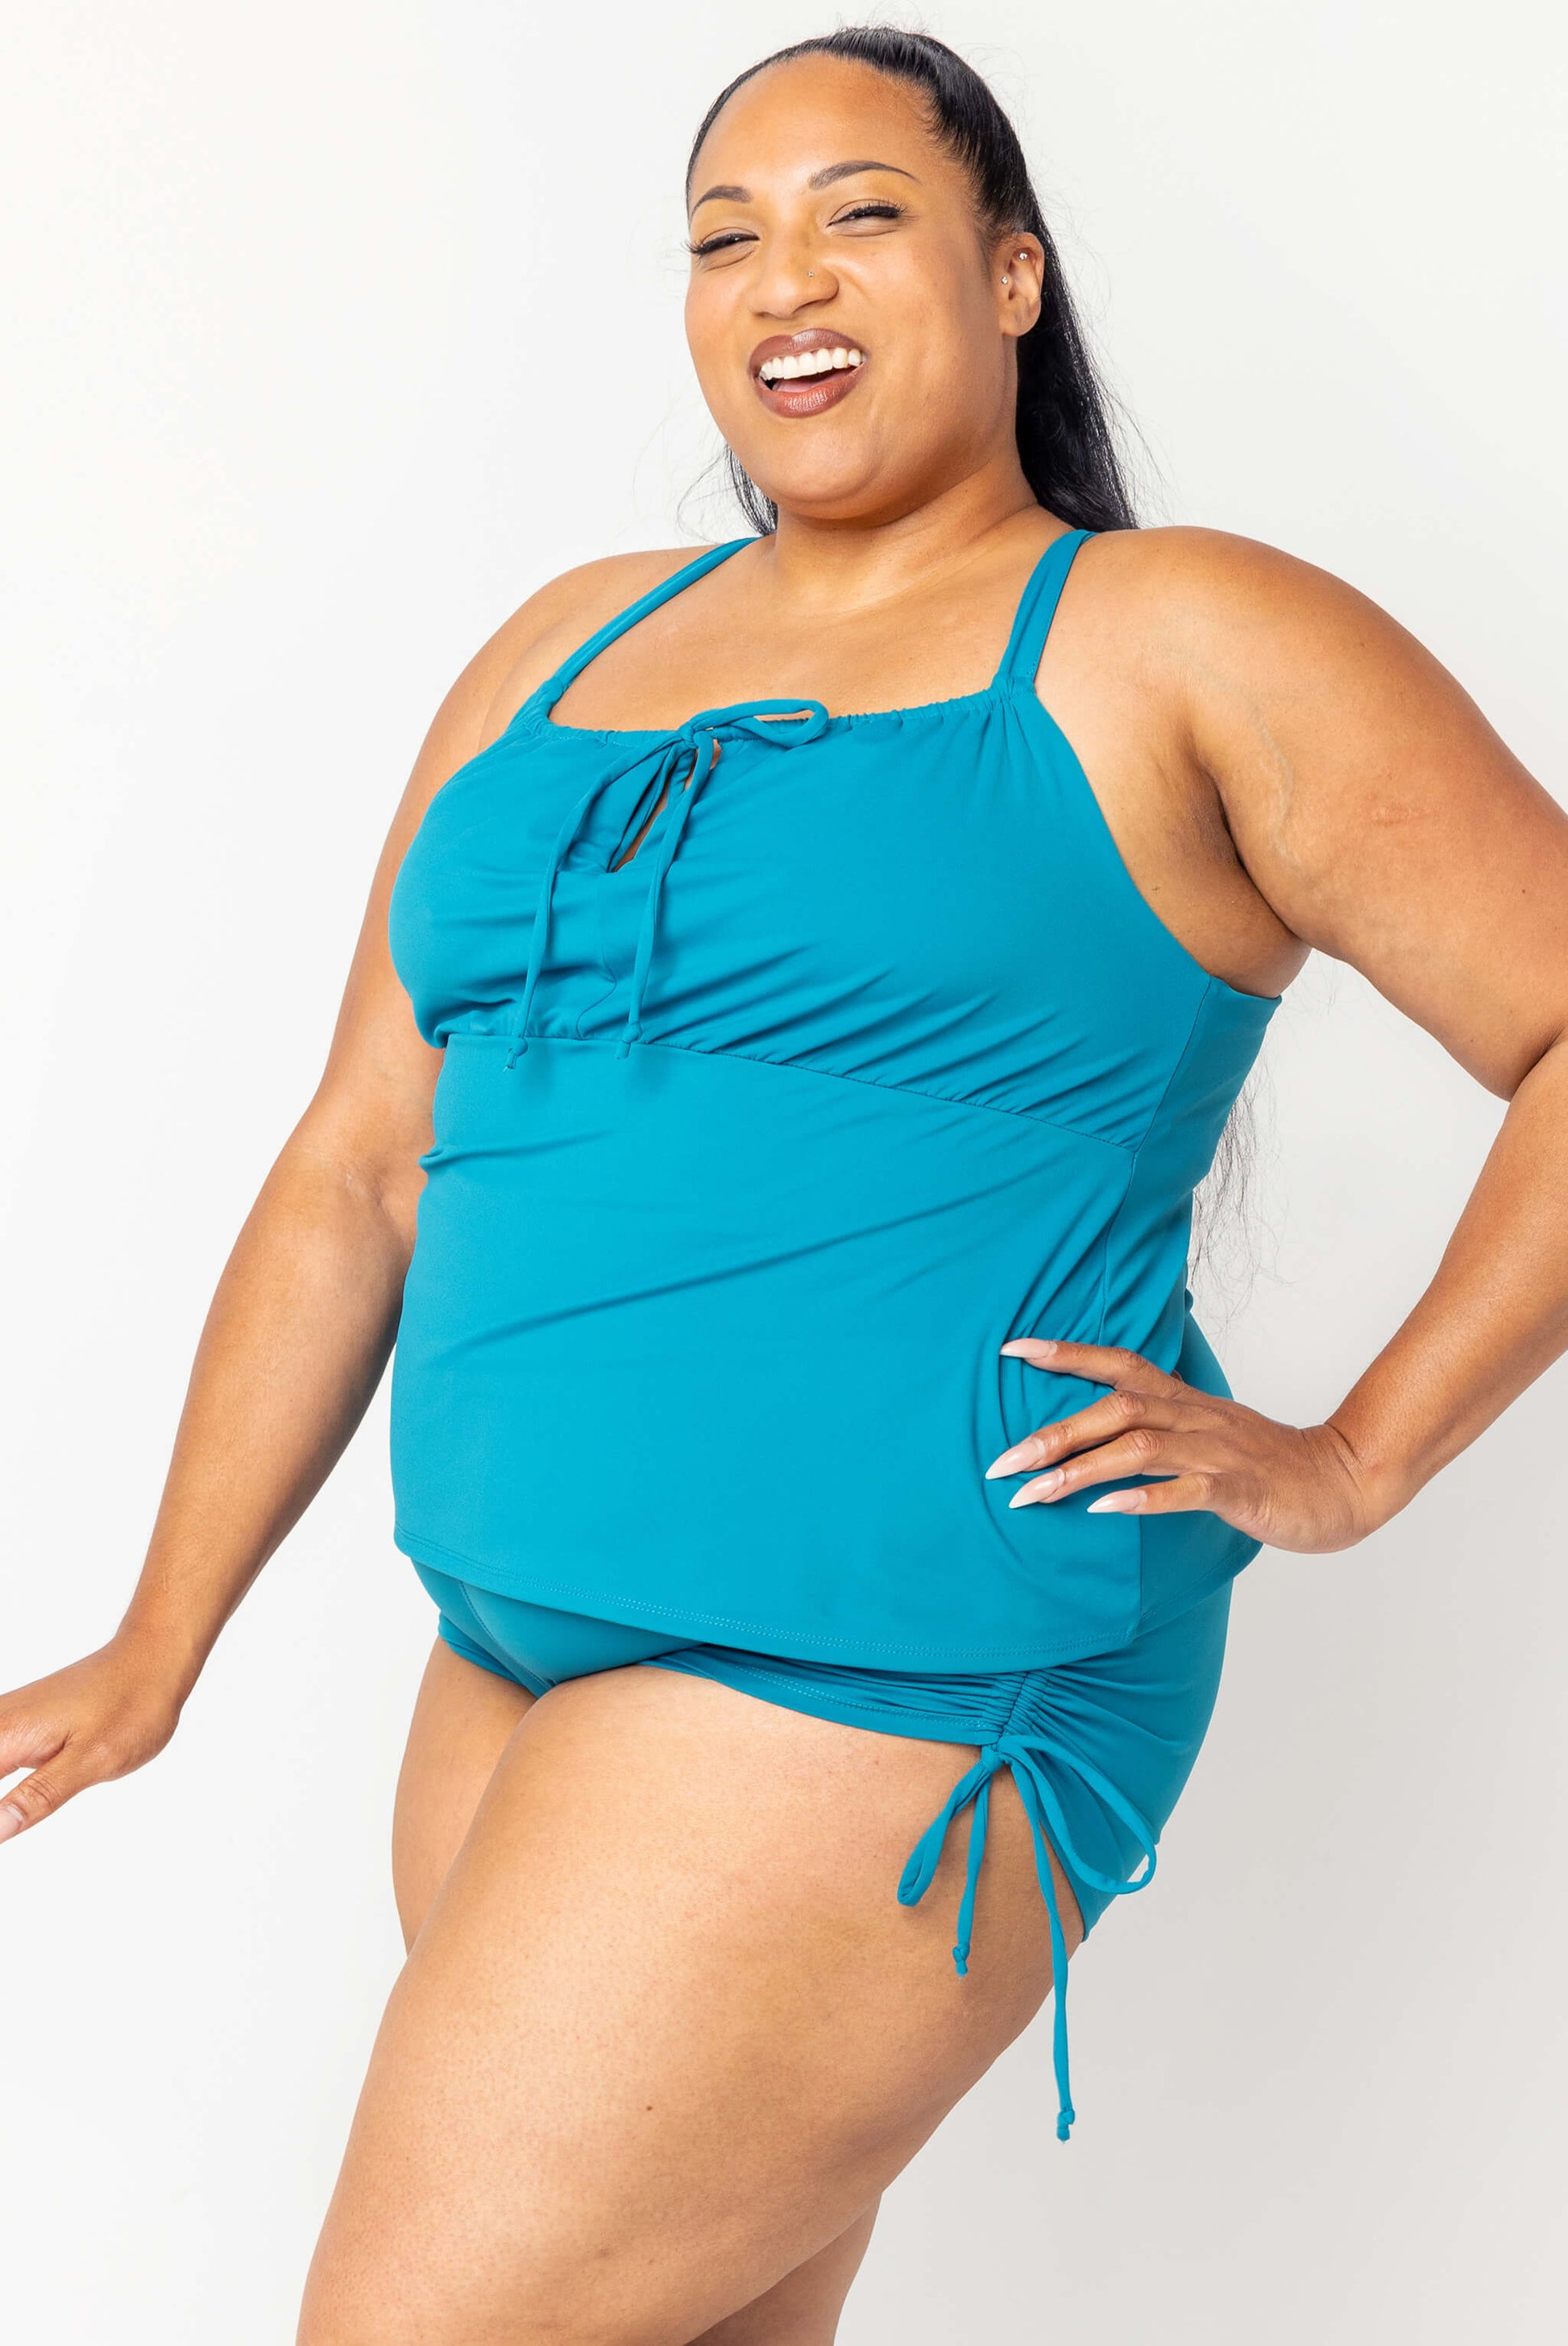 Profile view of Happy plus size model wearing teal swim tankini and matching booty shorts